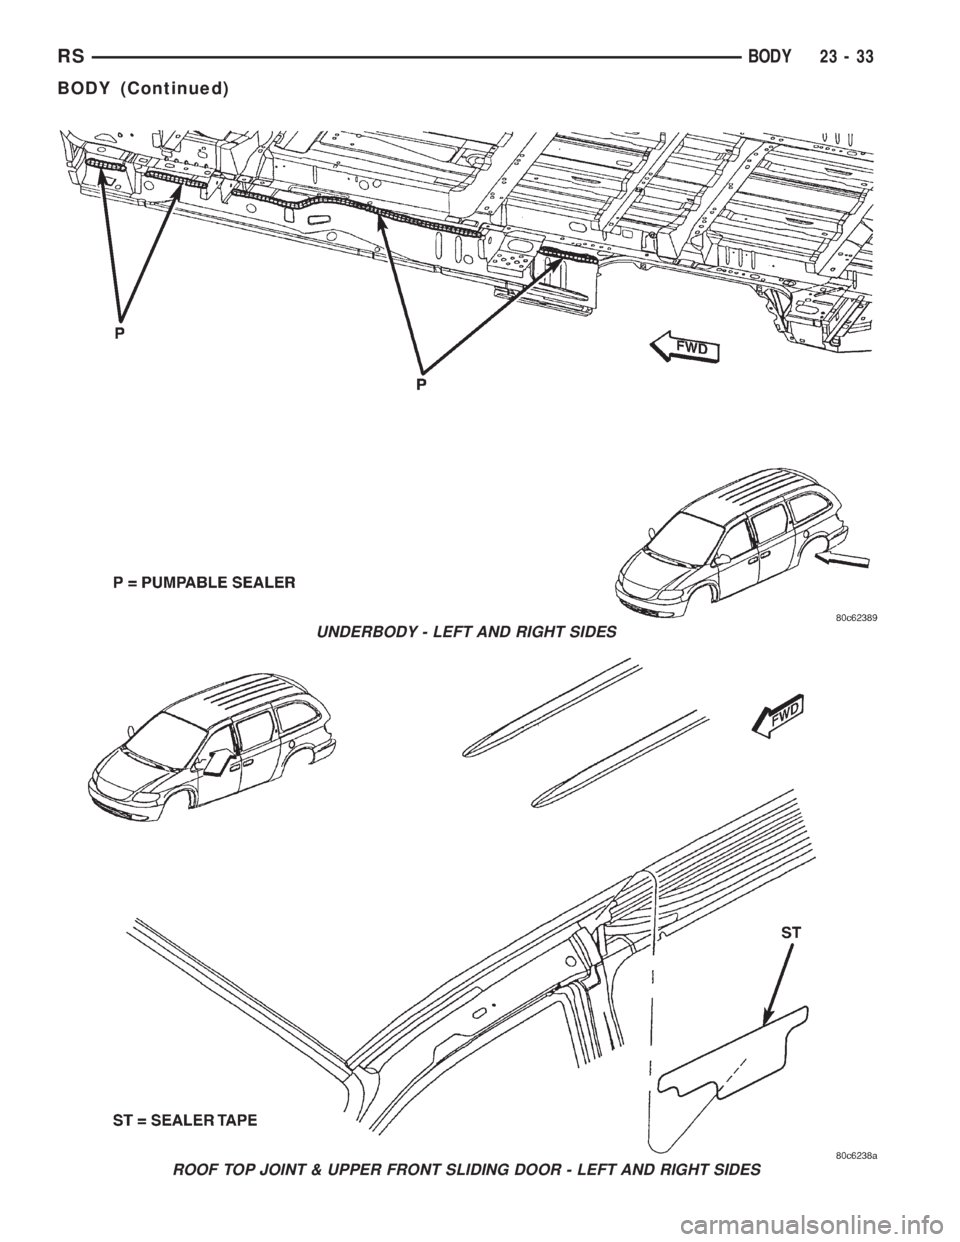 CHRYSLER VOYAGER 2001  Service Manual UNDERBODY - LEFT AND RIGHT SIDES
ROOF TOP JOINT & UPPER FRONT SLIDING DOOR - LEFT AND RIGHT SIDES
RSBODY23-33
BODY (Continued) 